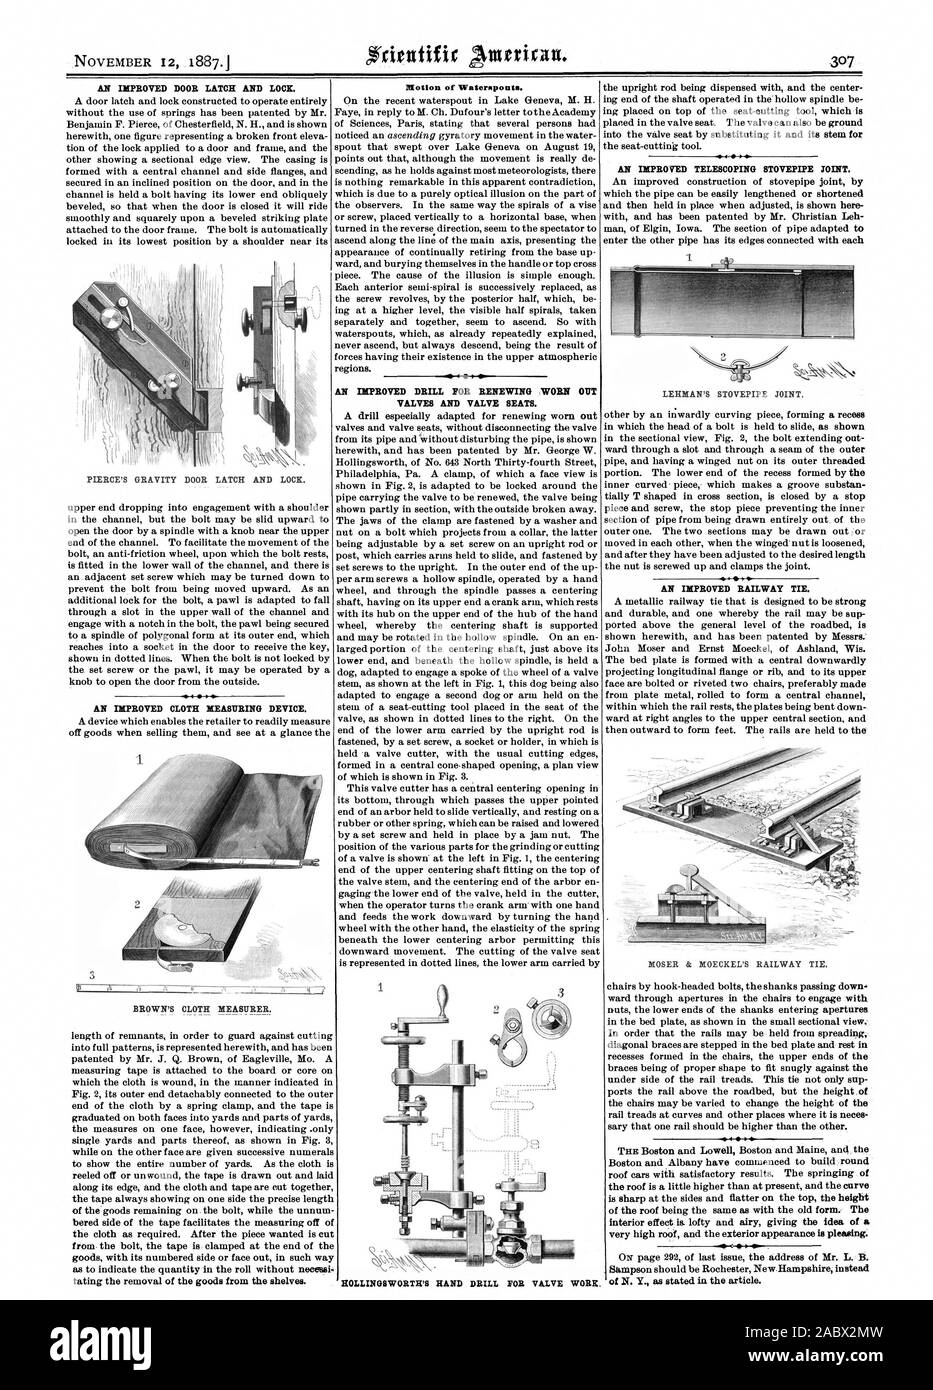 AN IMPROVED DOOR LATCH AND LOCK. AN IMPROVED CLOTH MEASURING DEVICE. Motion of Watemponts. 4  1  AN IMPROVED DRILL FOR RENEWING WORN OUT VALVES AND VALVE SEATS. AN IMPROVED TELESCOPING STOVEPIPE JOINT. AN IMPROVED RAILWAY TIE. HOLLINGSWORTH'S, scientific american, 1887-11-12 Stock Photo